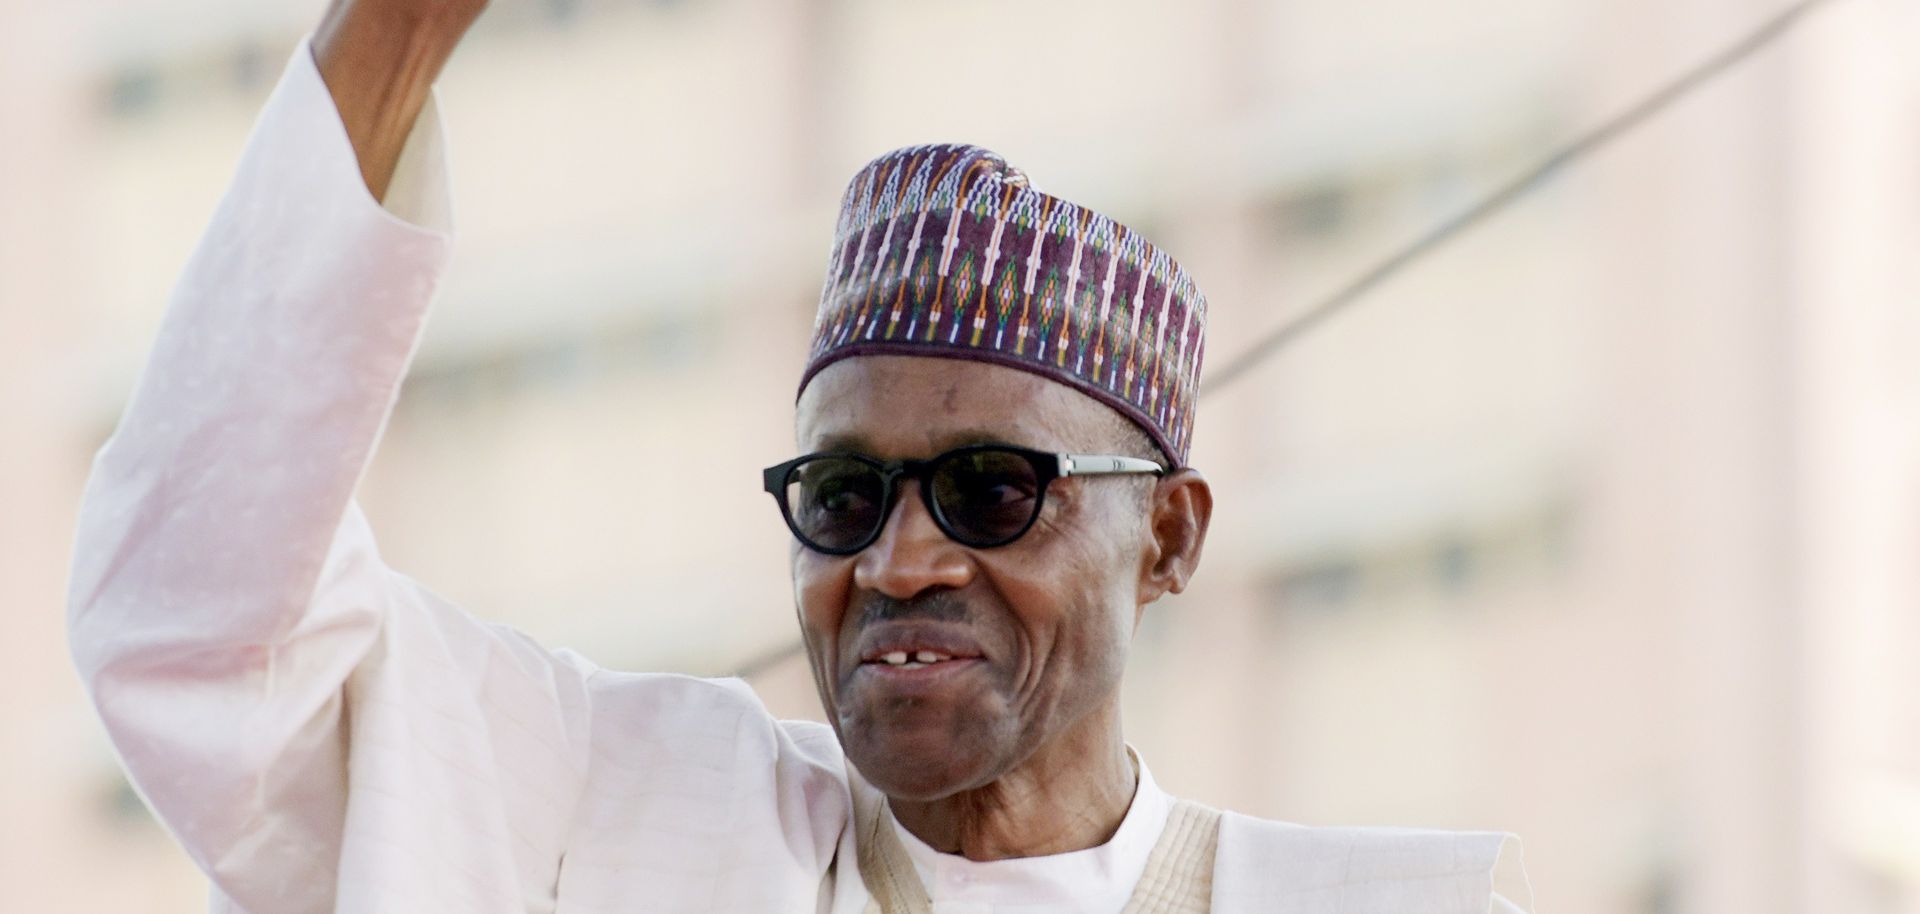 Nigerian President Muhammadu Buhari raises his fist to greet the crowd before taking an oath of office at the Eagles Square in Abuja on May 29.